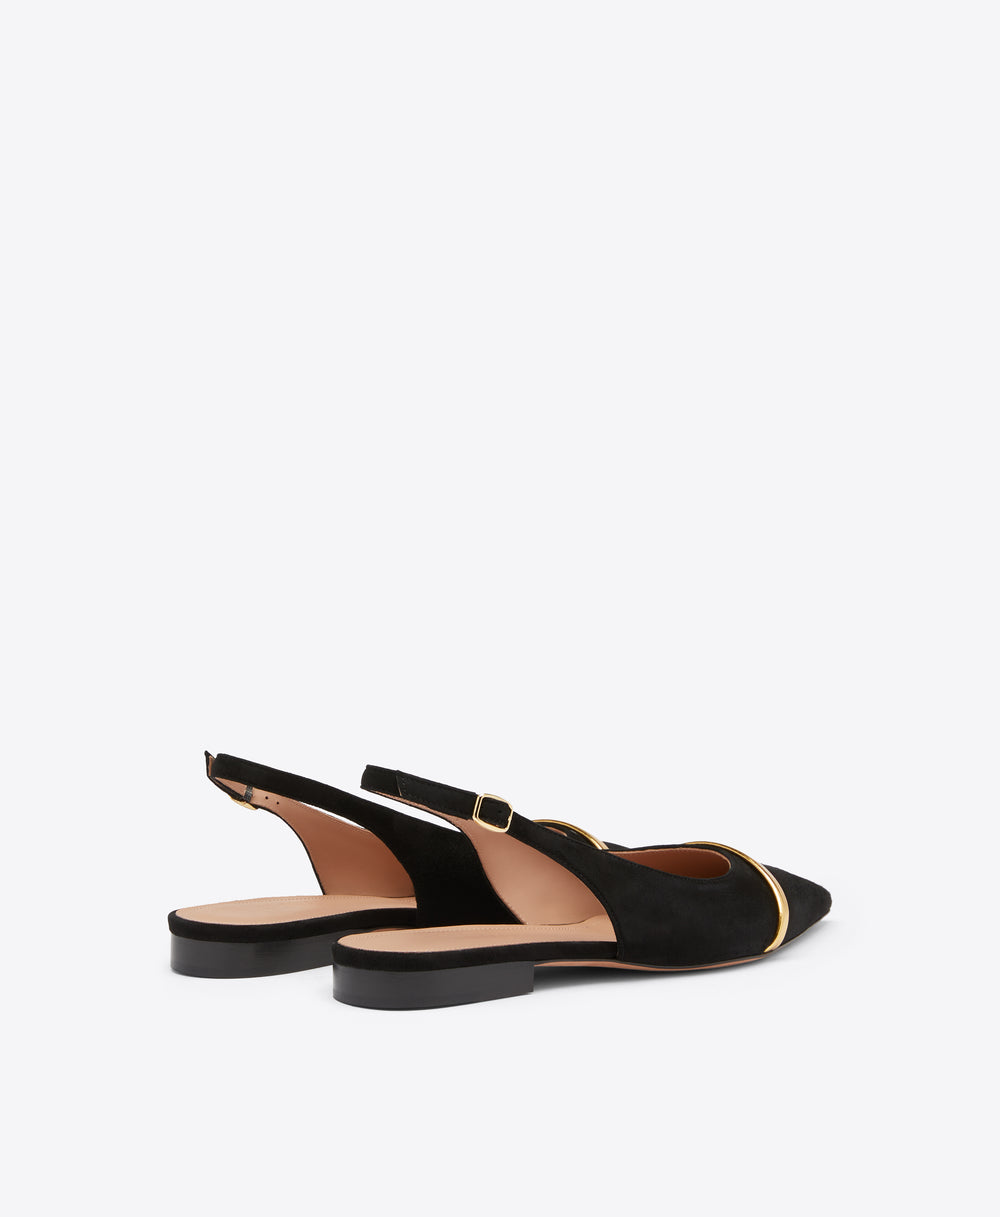 Jama Black Suede Flat Slingbacks with Gold Strap Malone Souliers